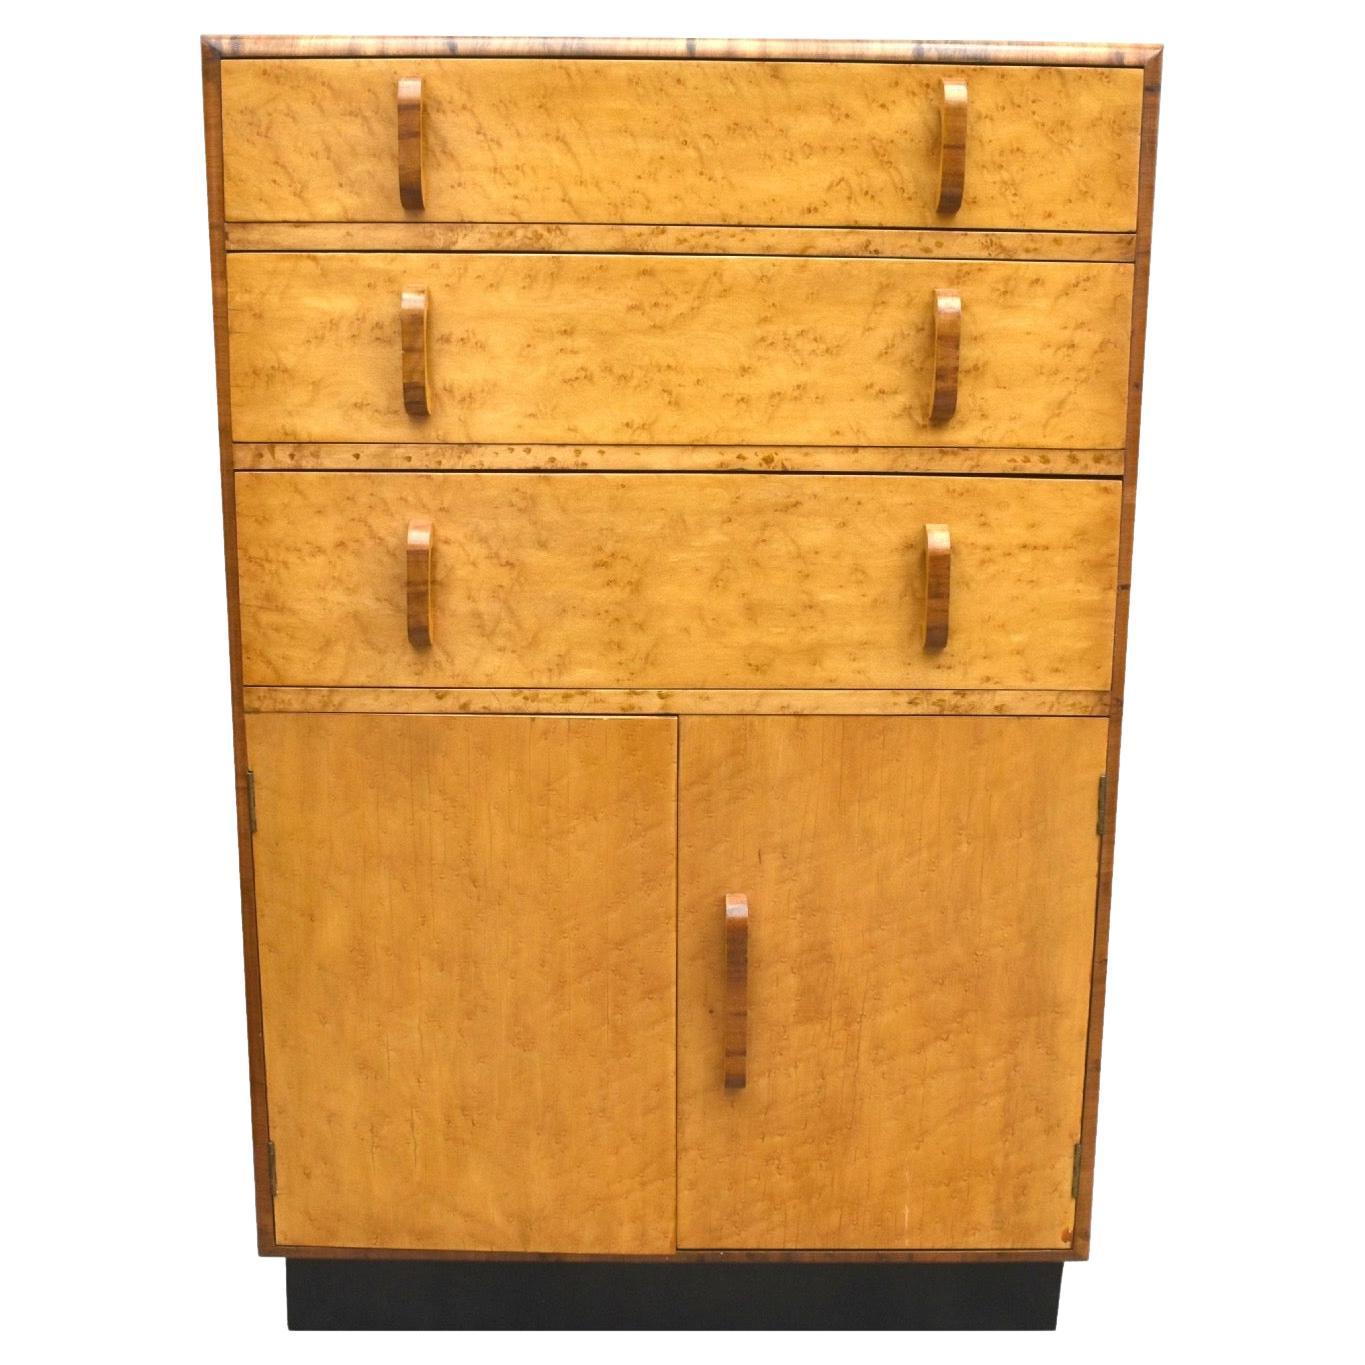 For your consideration is this English, Art Deco, blonde Birds Eye Maple two-door, three drawer single-piece tallboy, raised on an ebonised plinth, circa 1930 and in excellent original condition. Not only does this tallboy look the part but it's